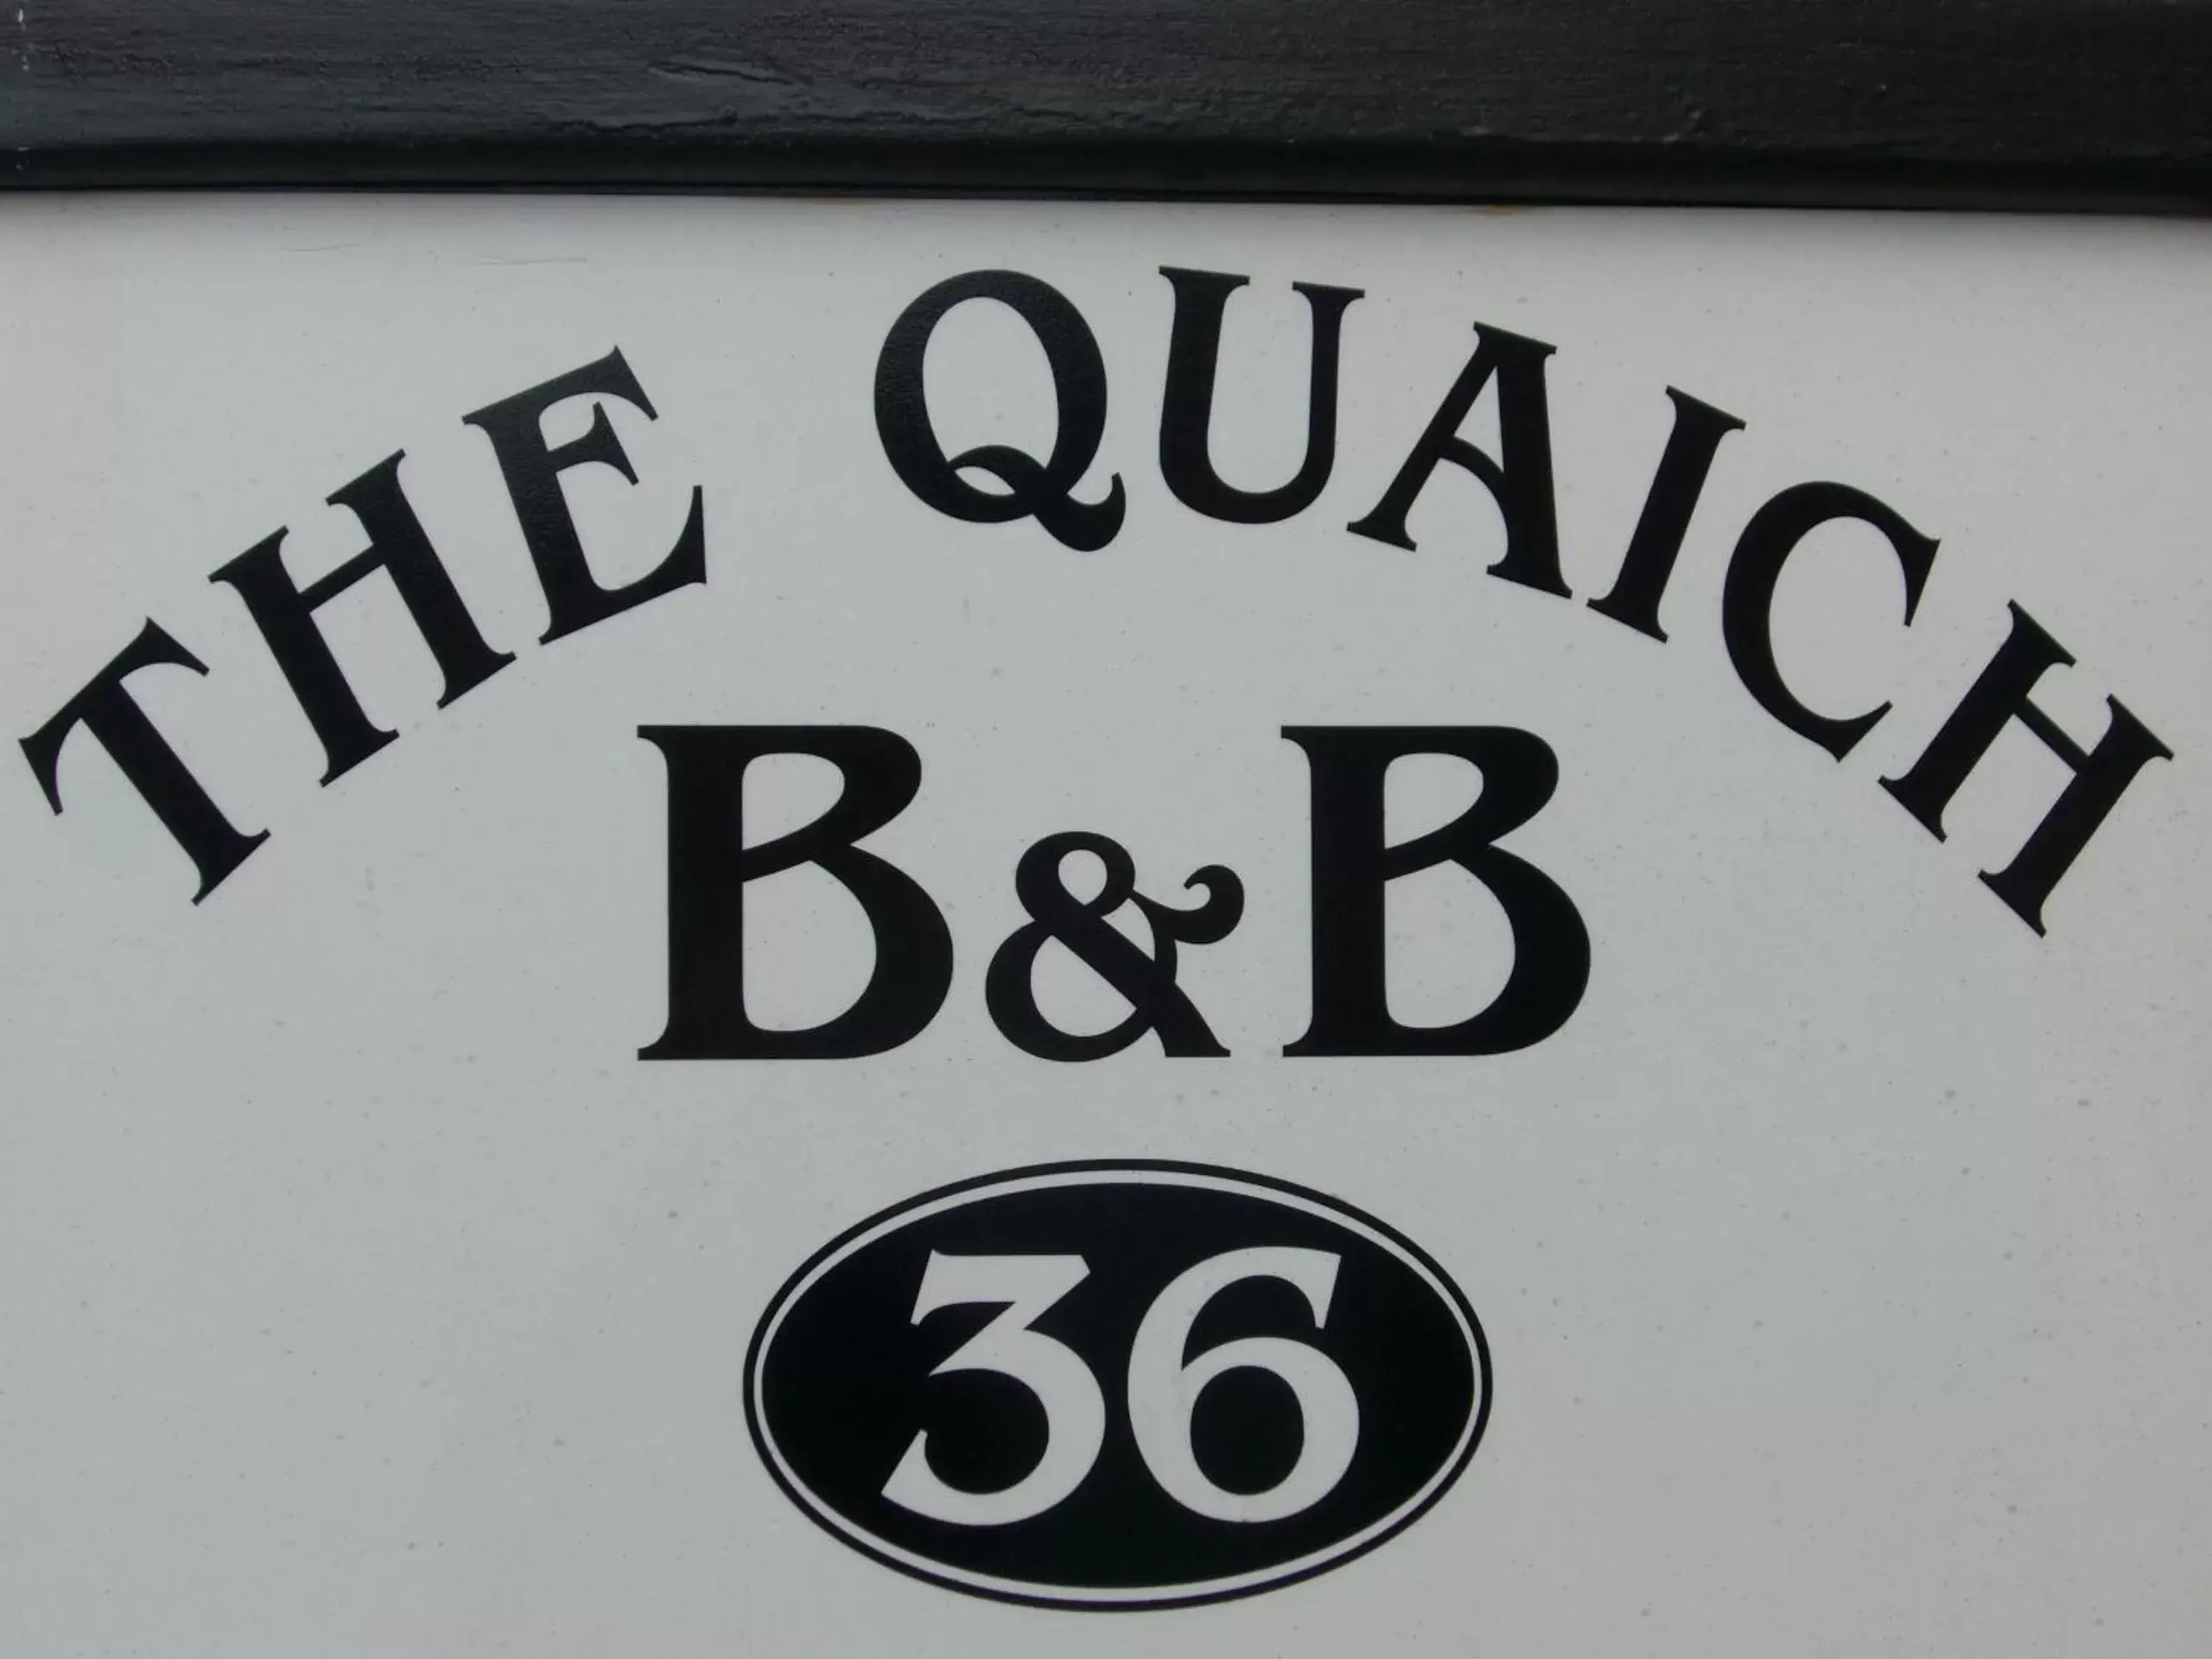 Other in The Quaich B&B